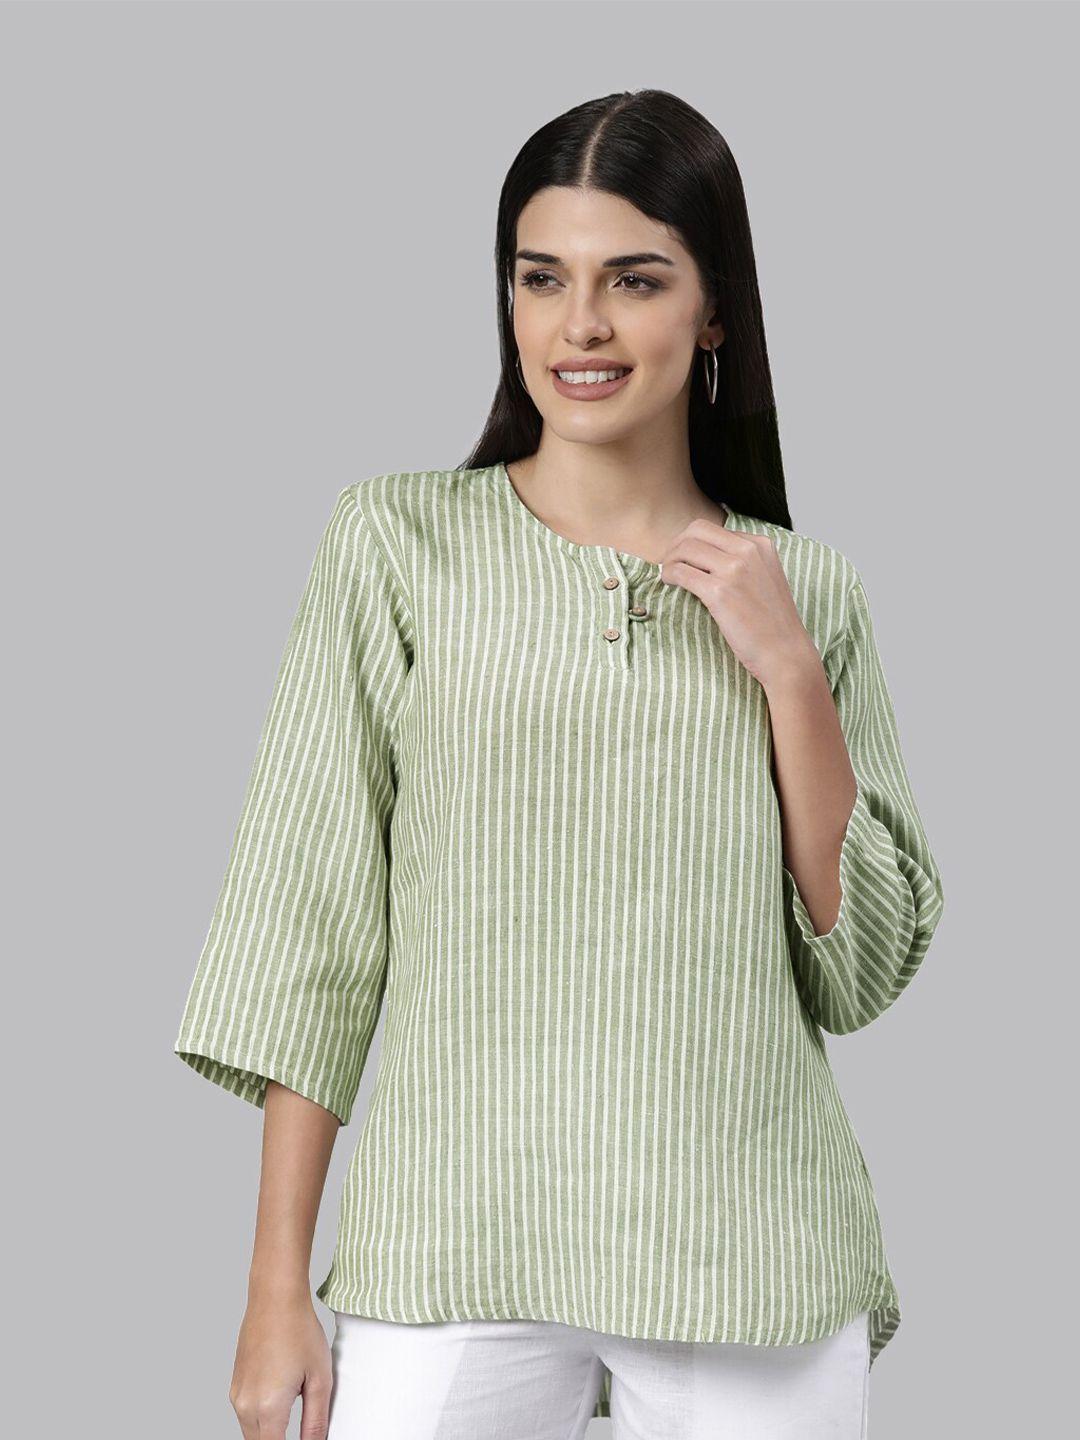 ecentric-women-olive-green-striped-top